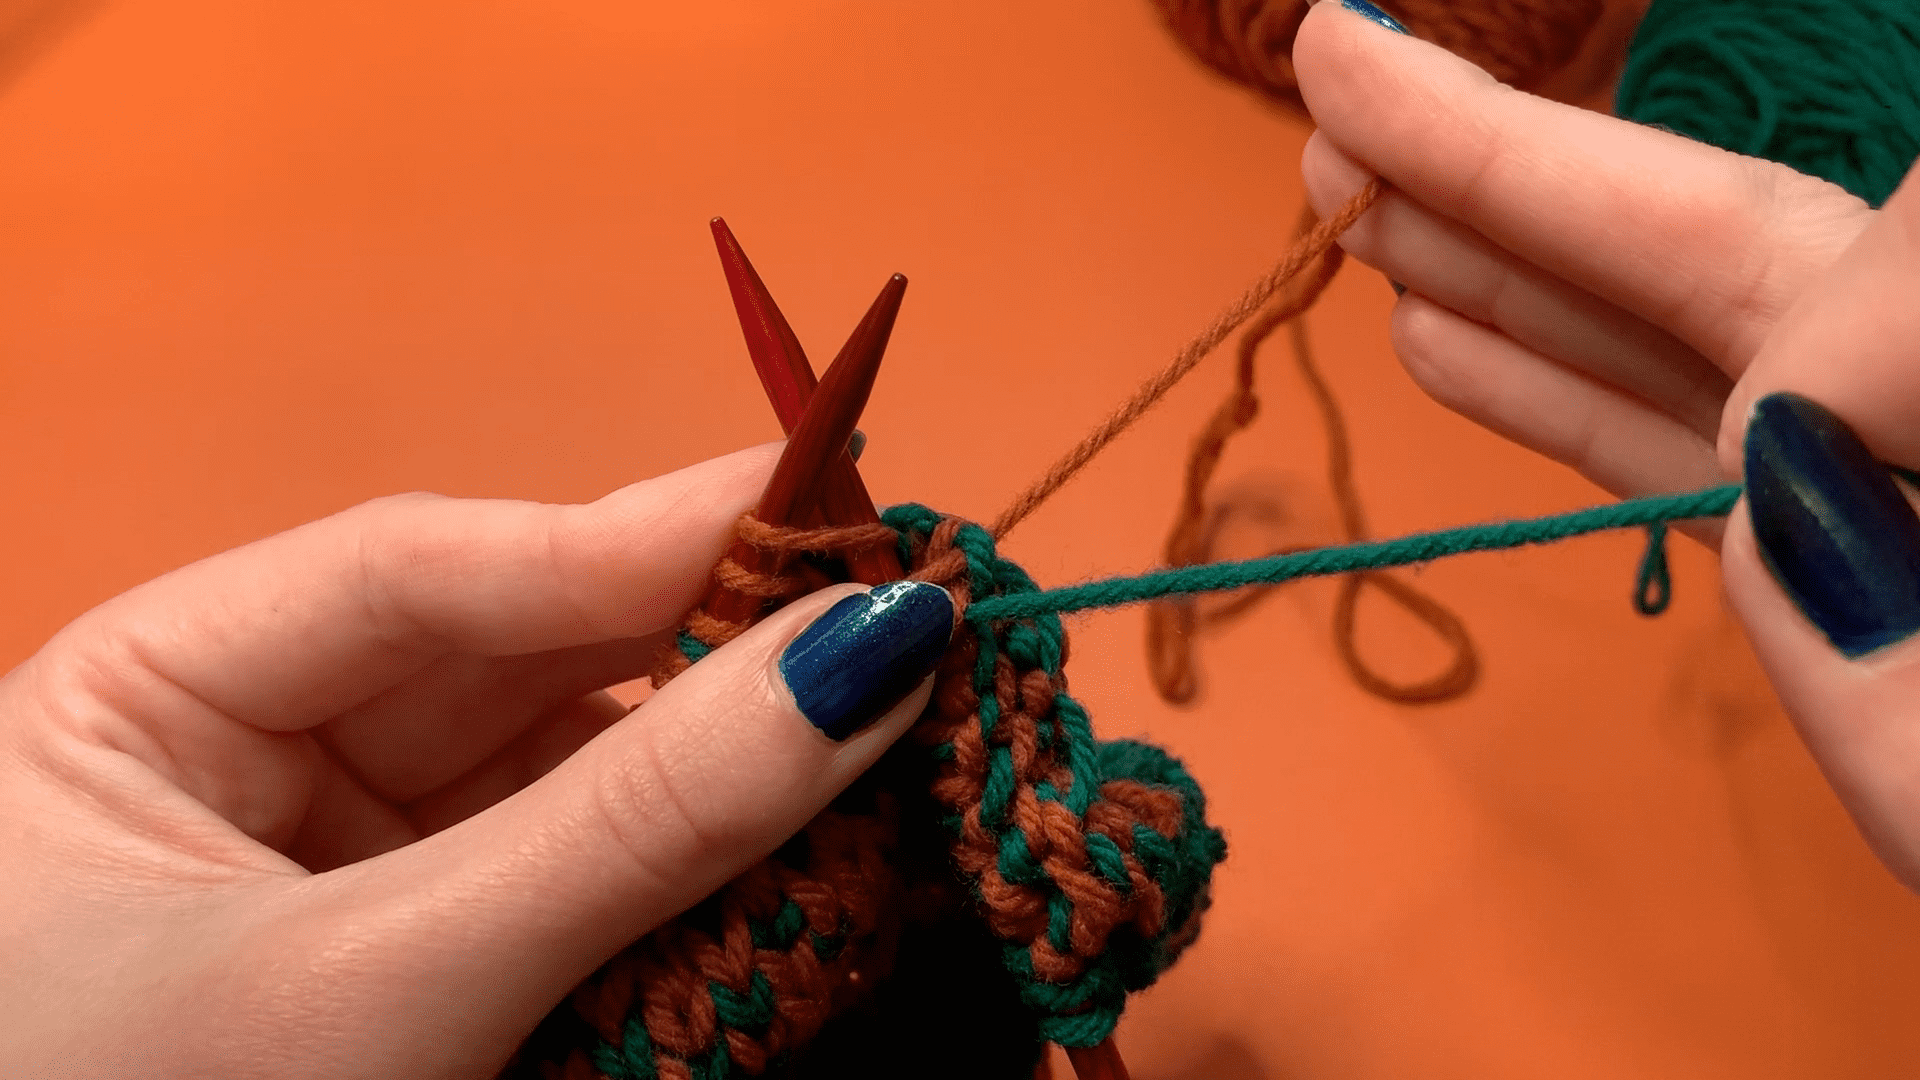 In this photo, the green yarn is the background color and so is crossed over top of the orange.